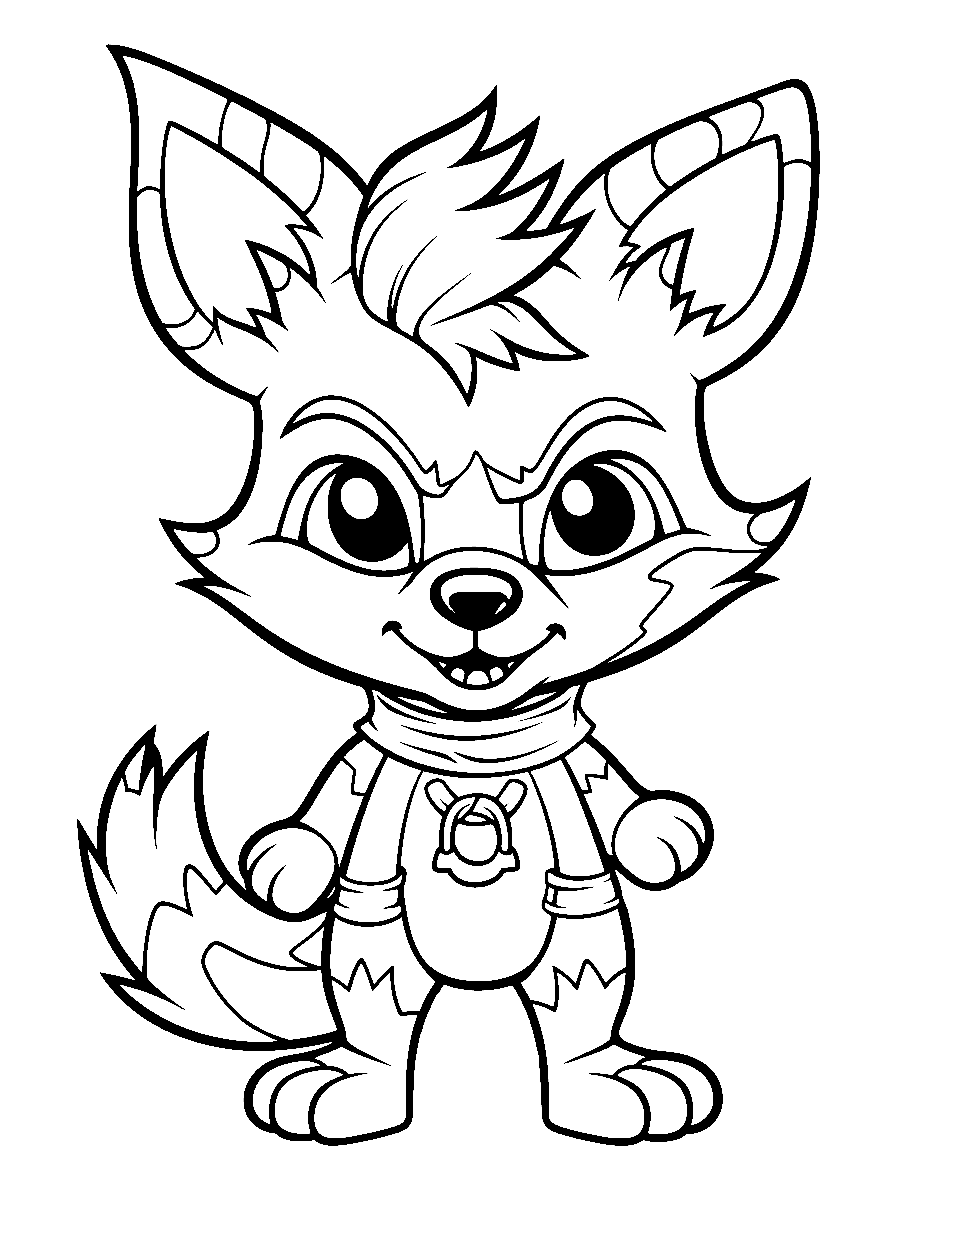 Easy Breezy Chibi Foxy Five Nights at Freddys Coloring Page - An easy-to-color image of a chibi Foxy in a relaxed pose.